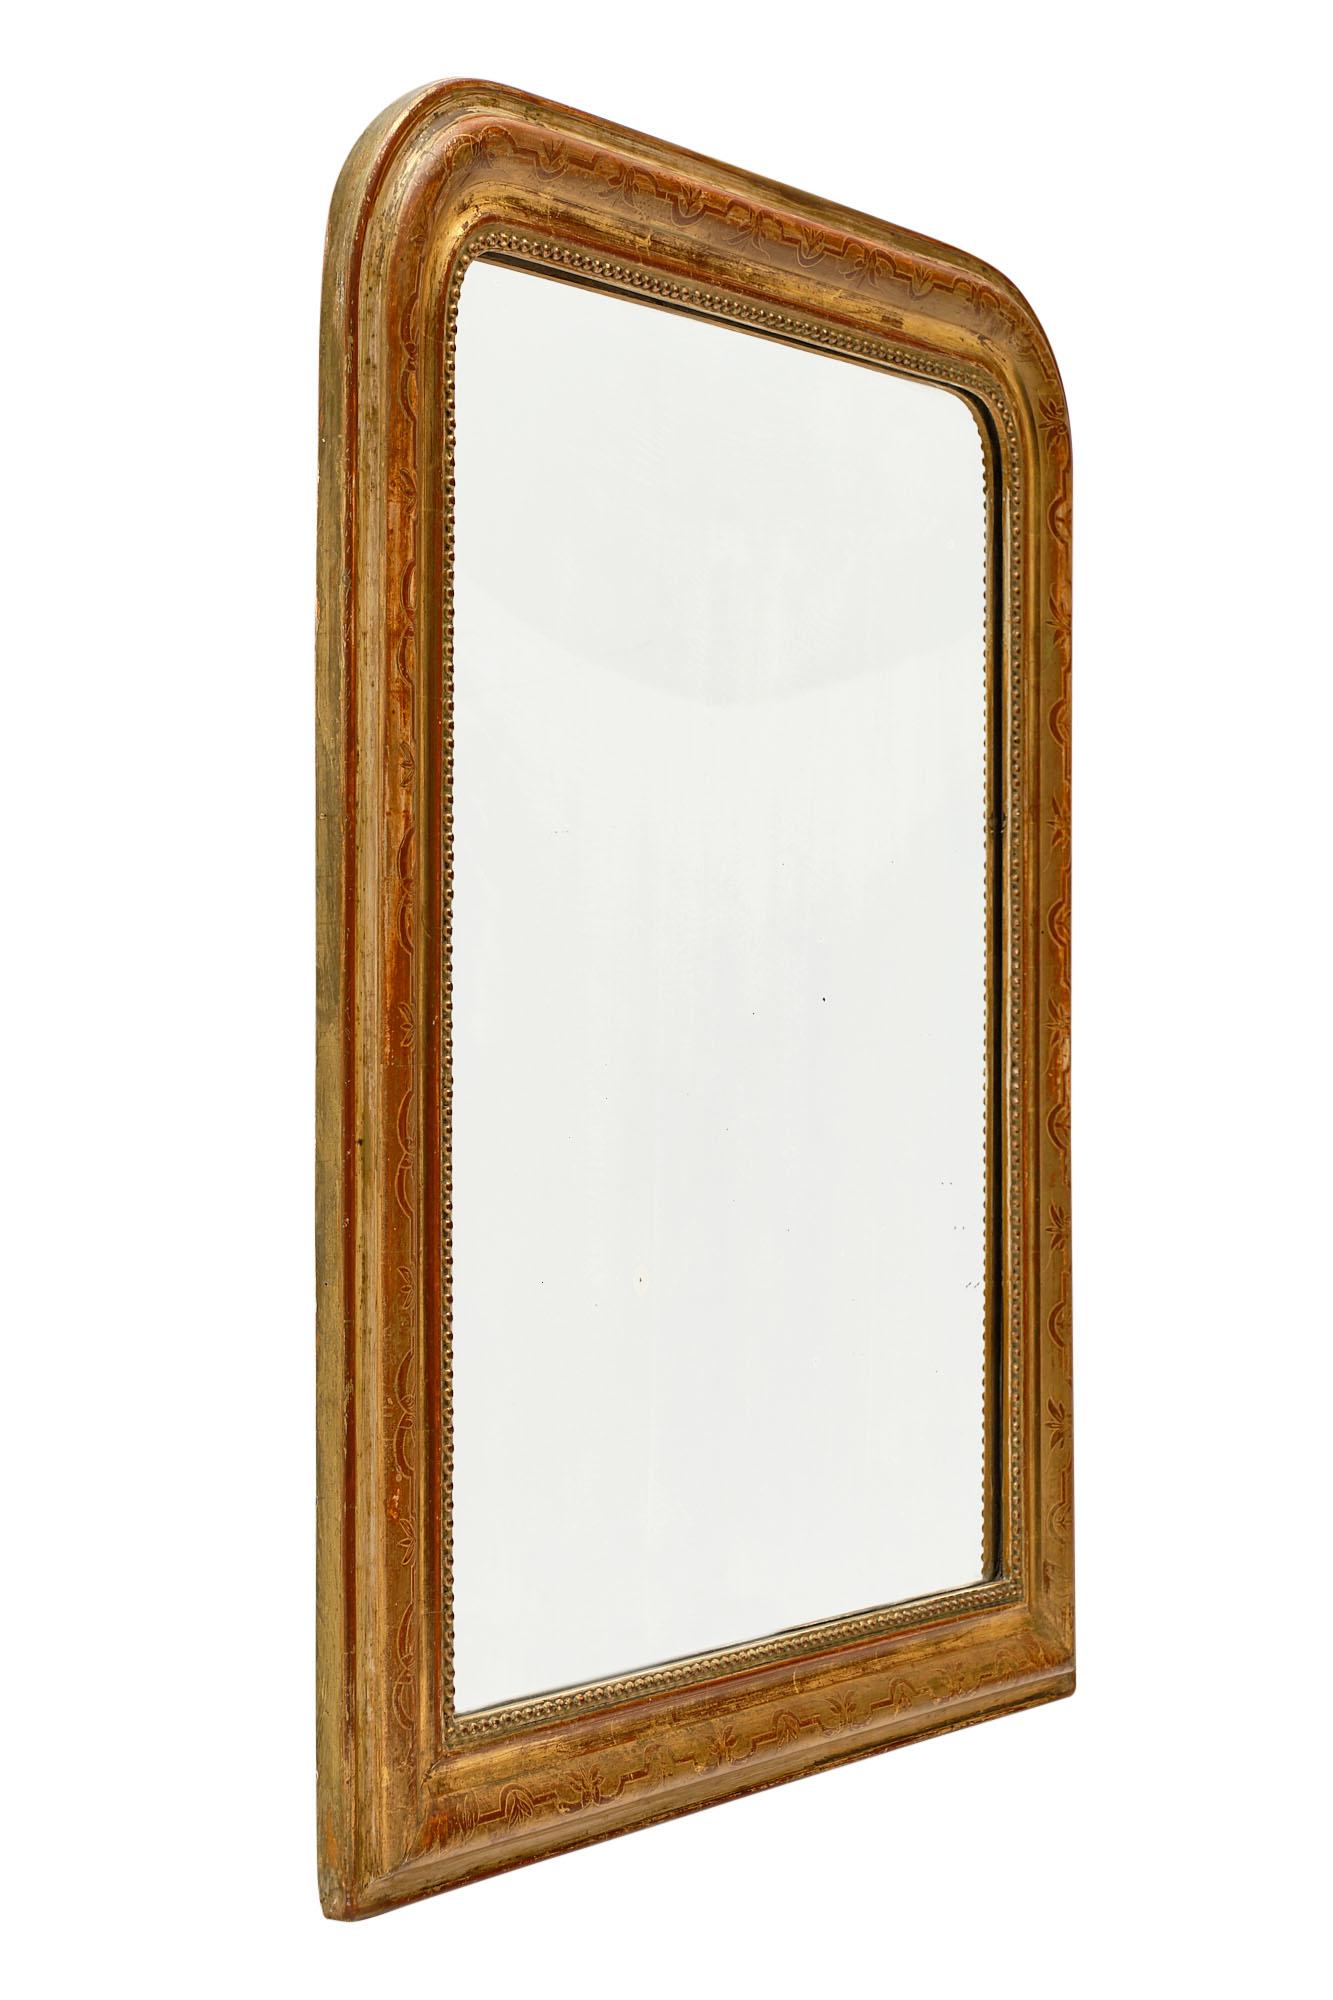 Gold leaf Louis Philippe period mirror from France with a beautiful hand-chiseled wood and gesso frame. The gold leaf has a beautiful patina and the sienna colored glaze shows through for a warm and inviting impact.